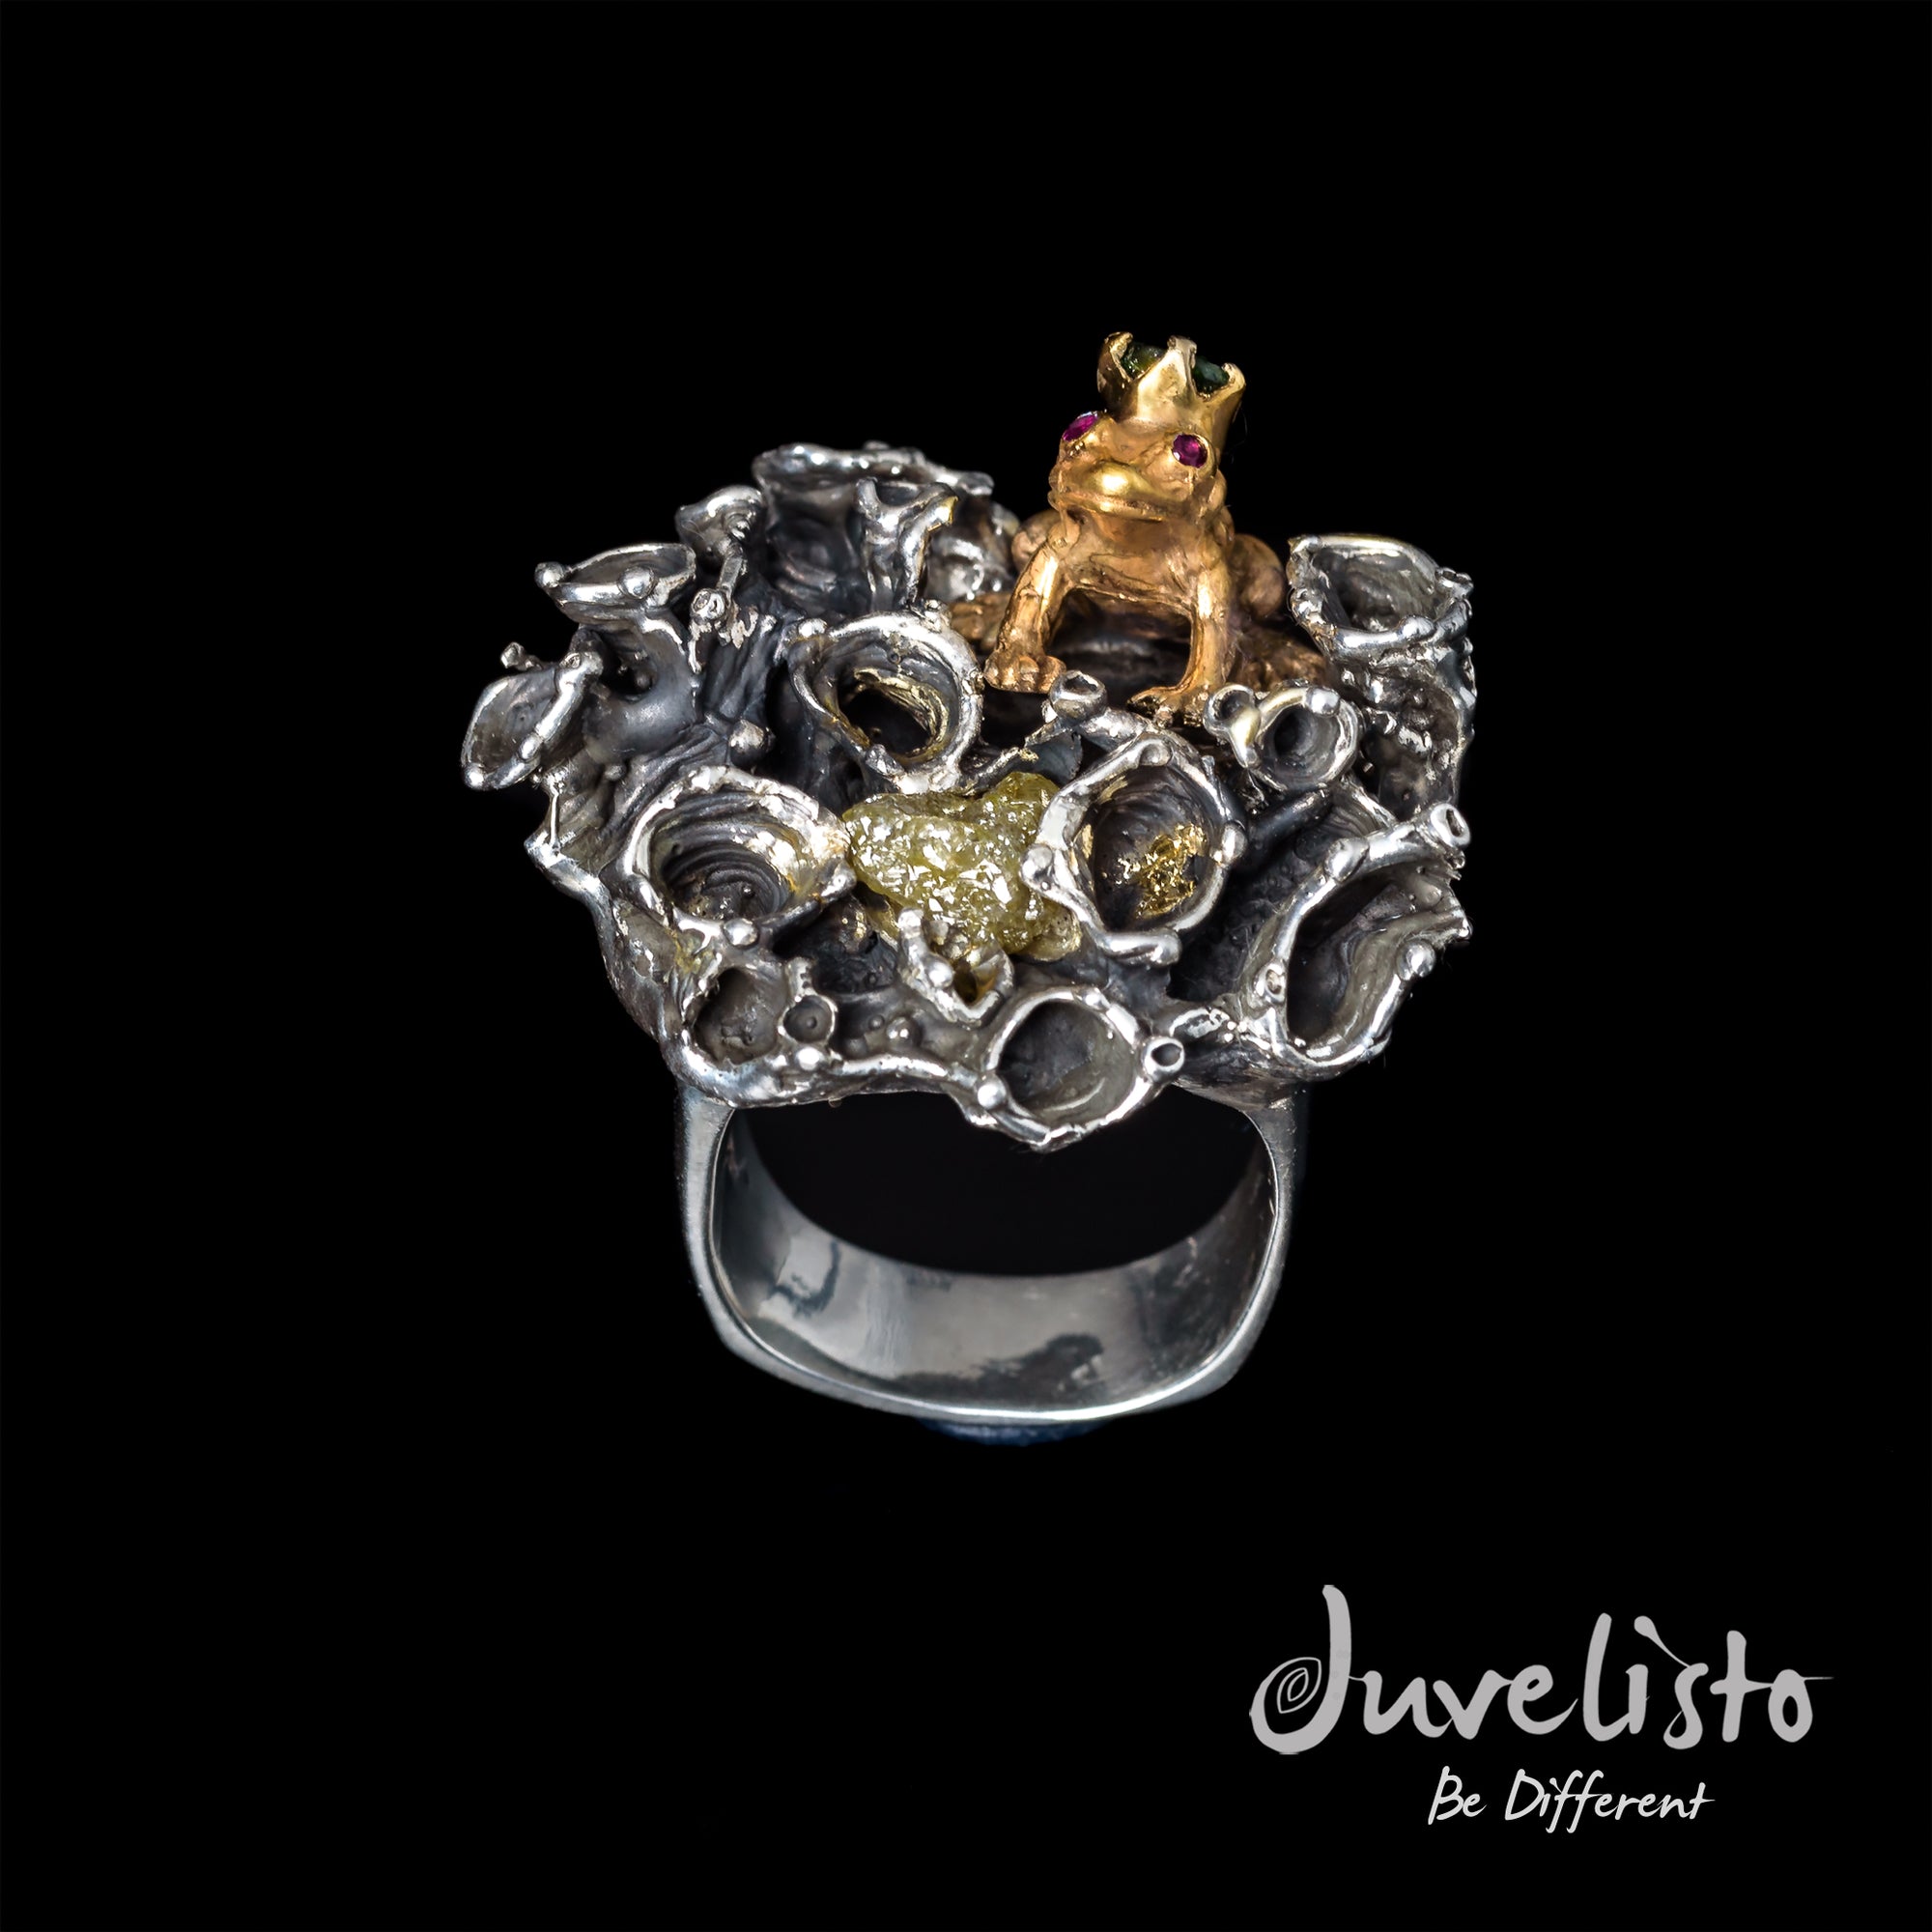 Juvelisto Design Charming Frog Prince Ring in Sterling Silver with Raw Diamond